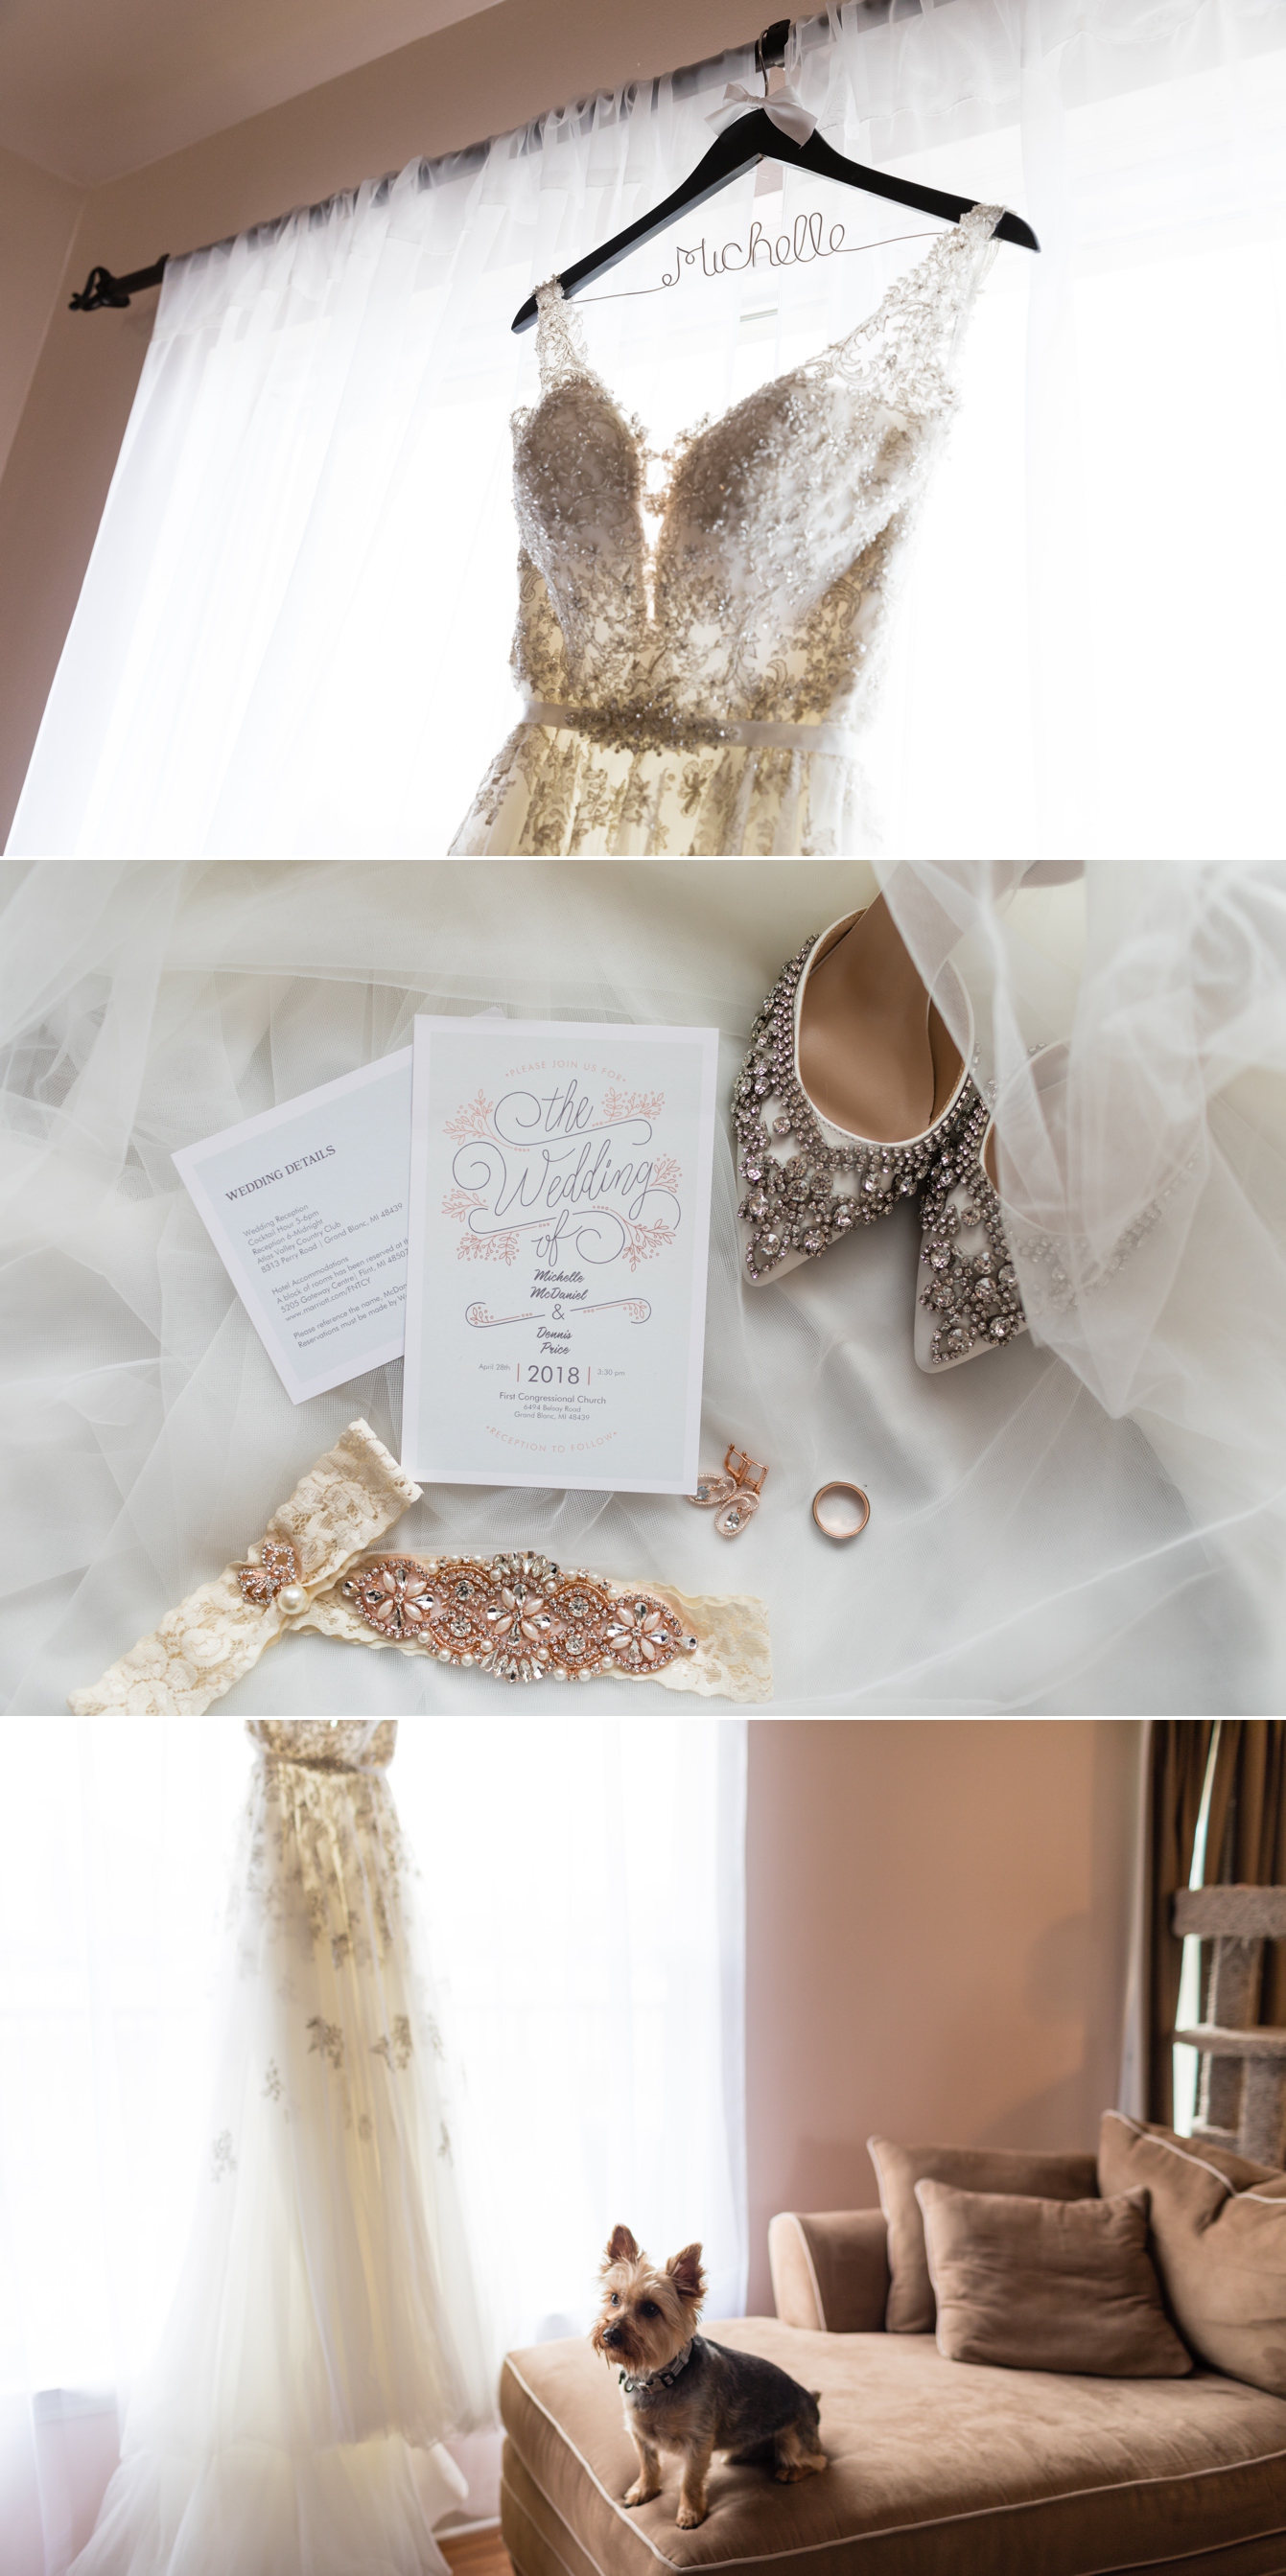 Bride's wedding day details including shoes, invitations, dress, and rings at the Atlas Valley Country Club